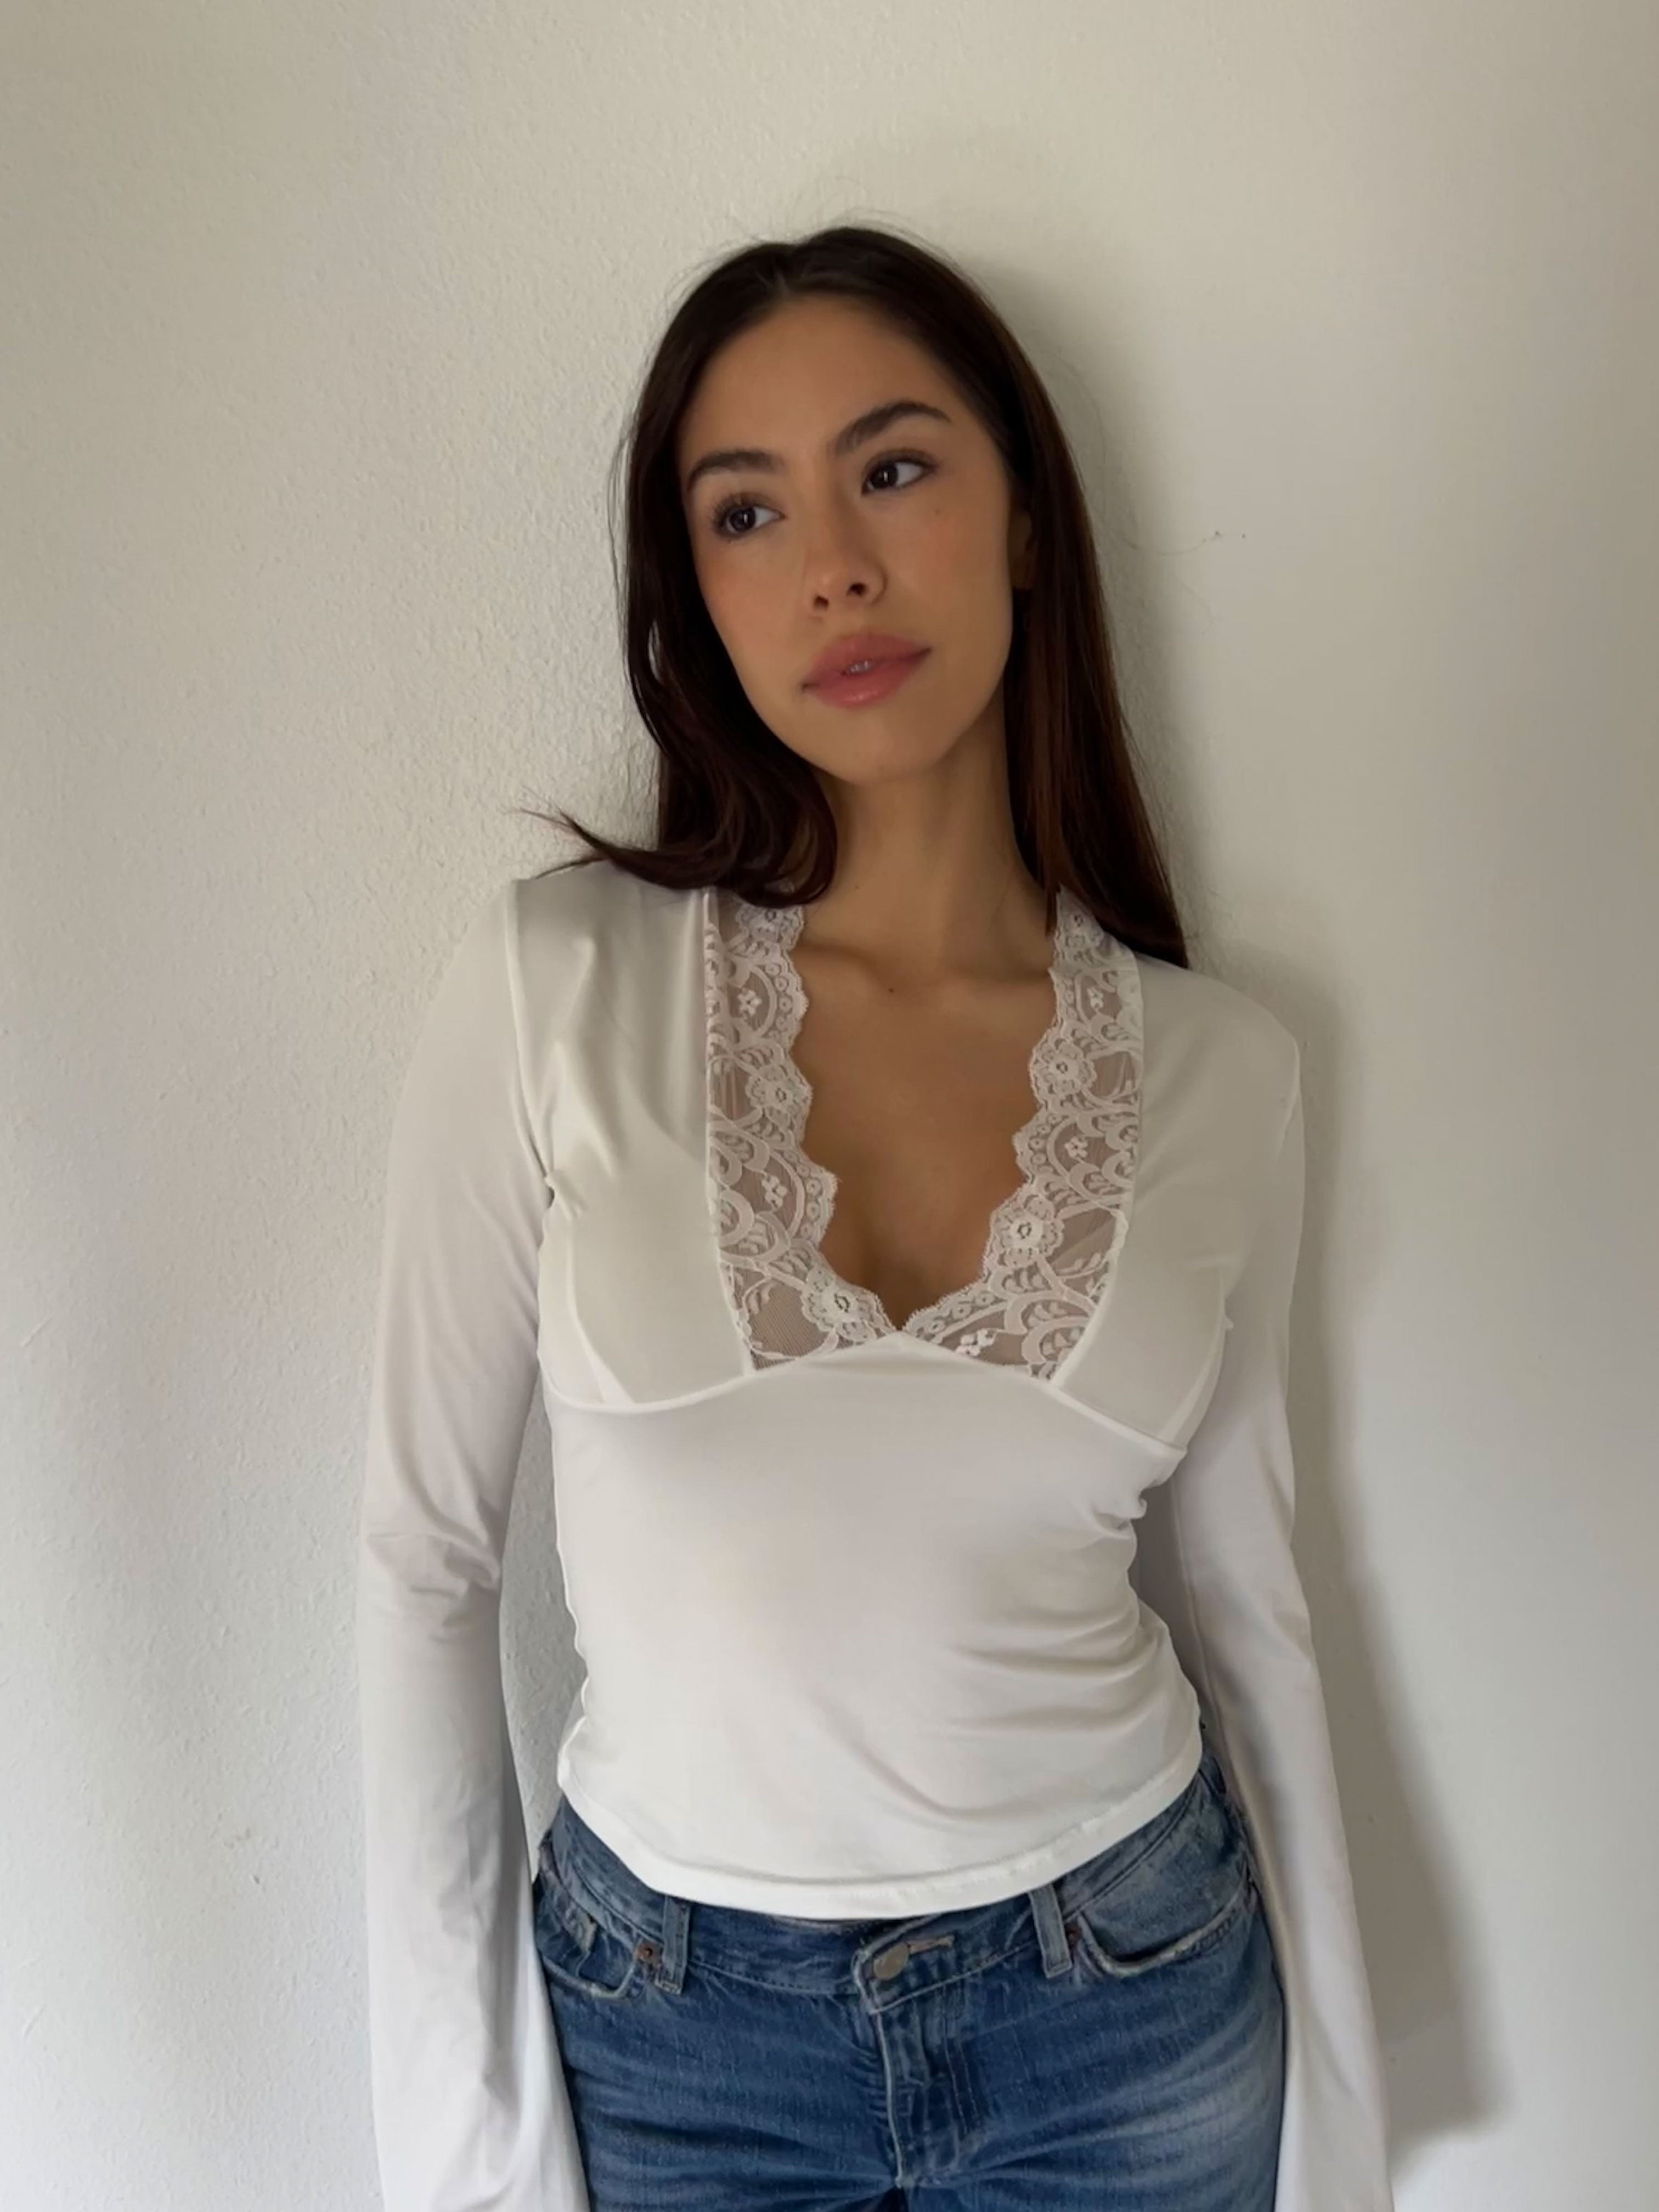 Veyles's Lace Top Perfect Fit White